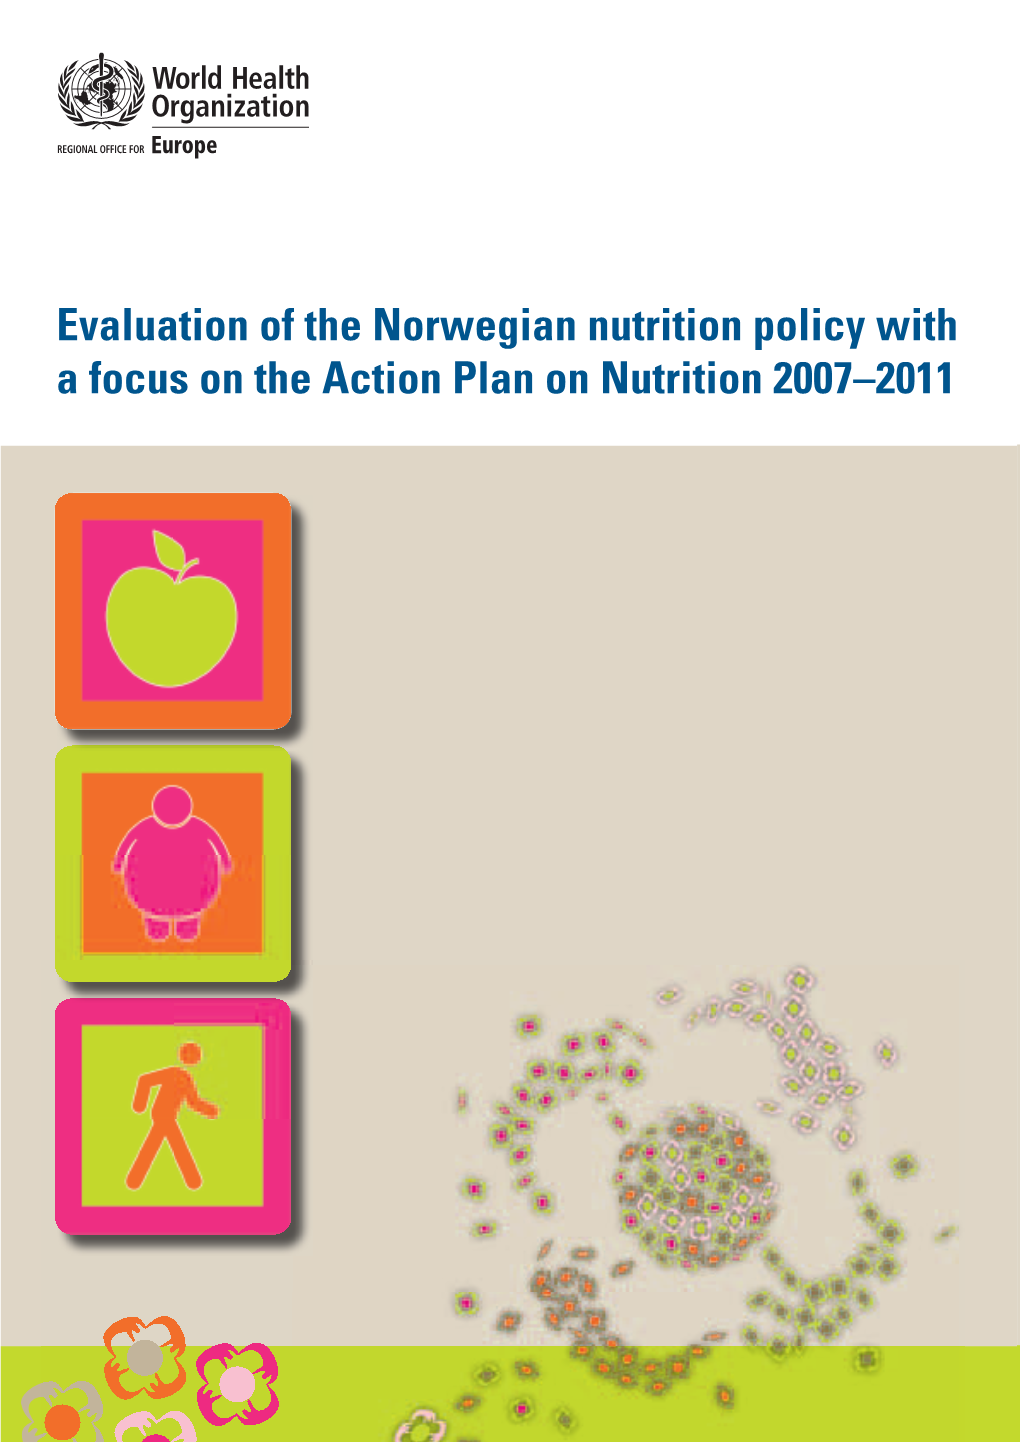 Evaluation of the Norwegian Nutrition Policy with Focus on the Action Plan